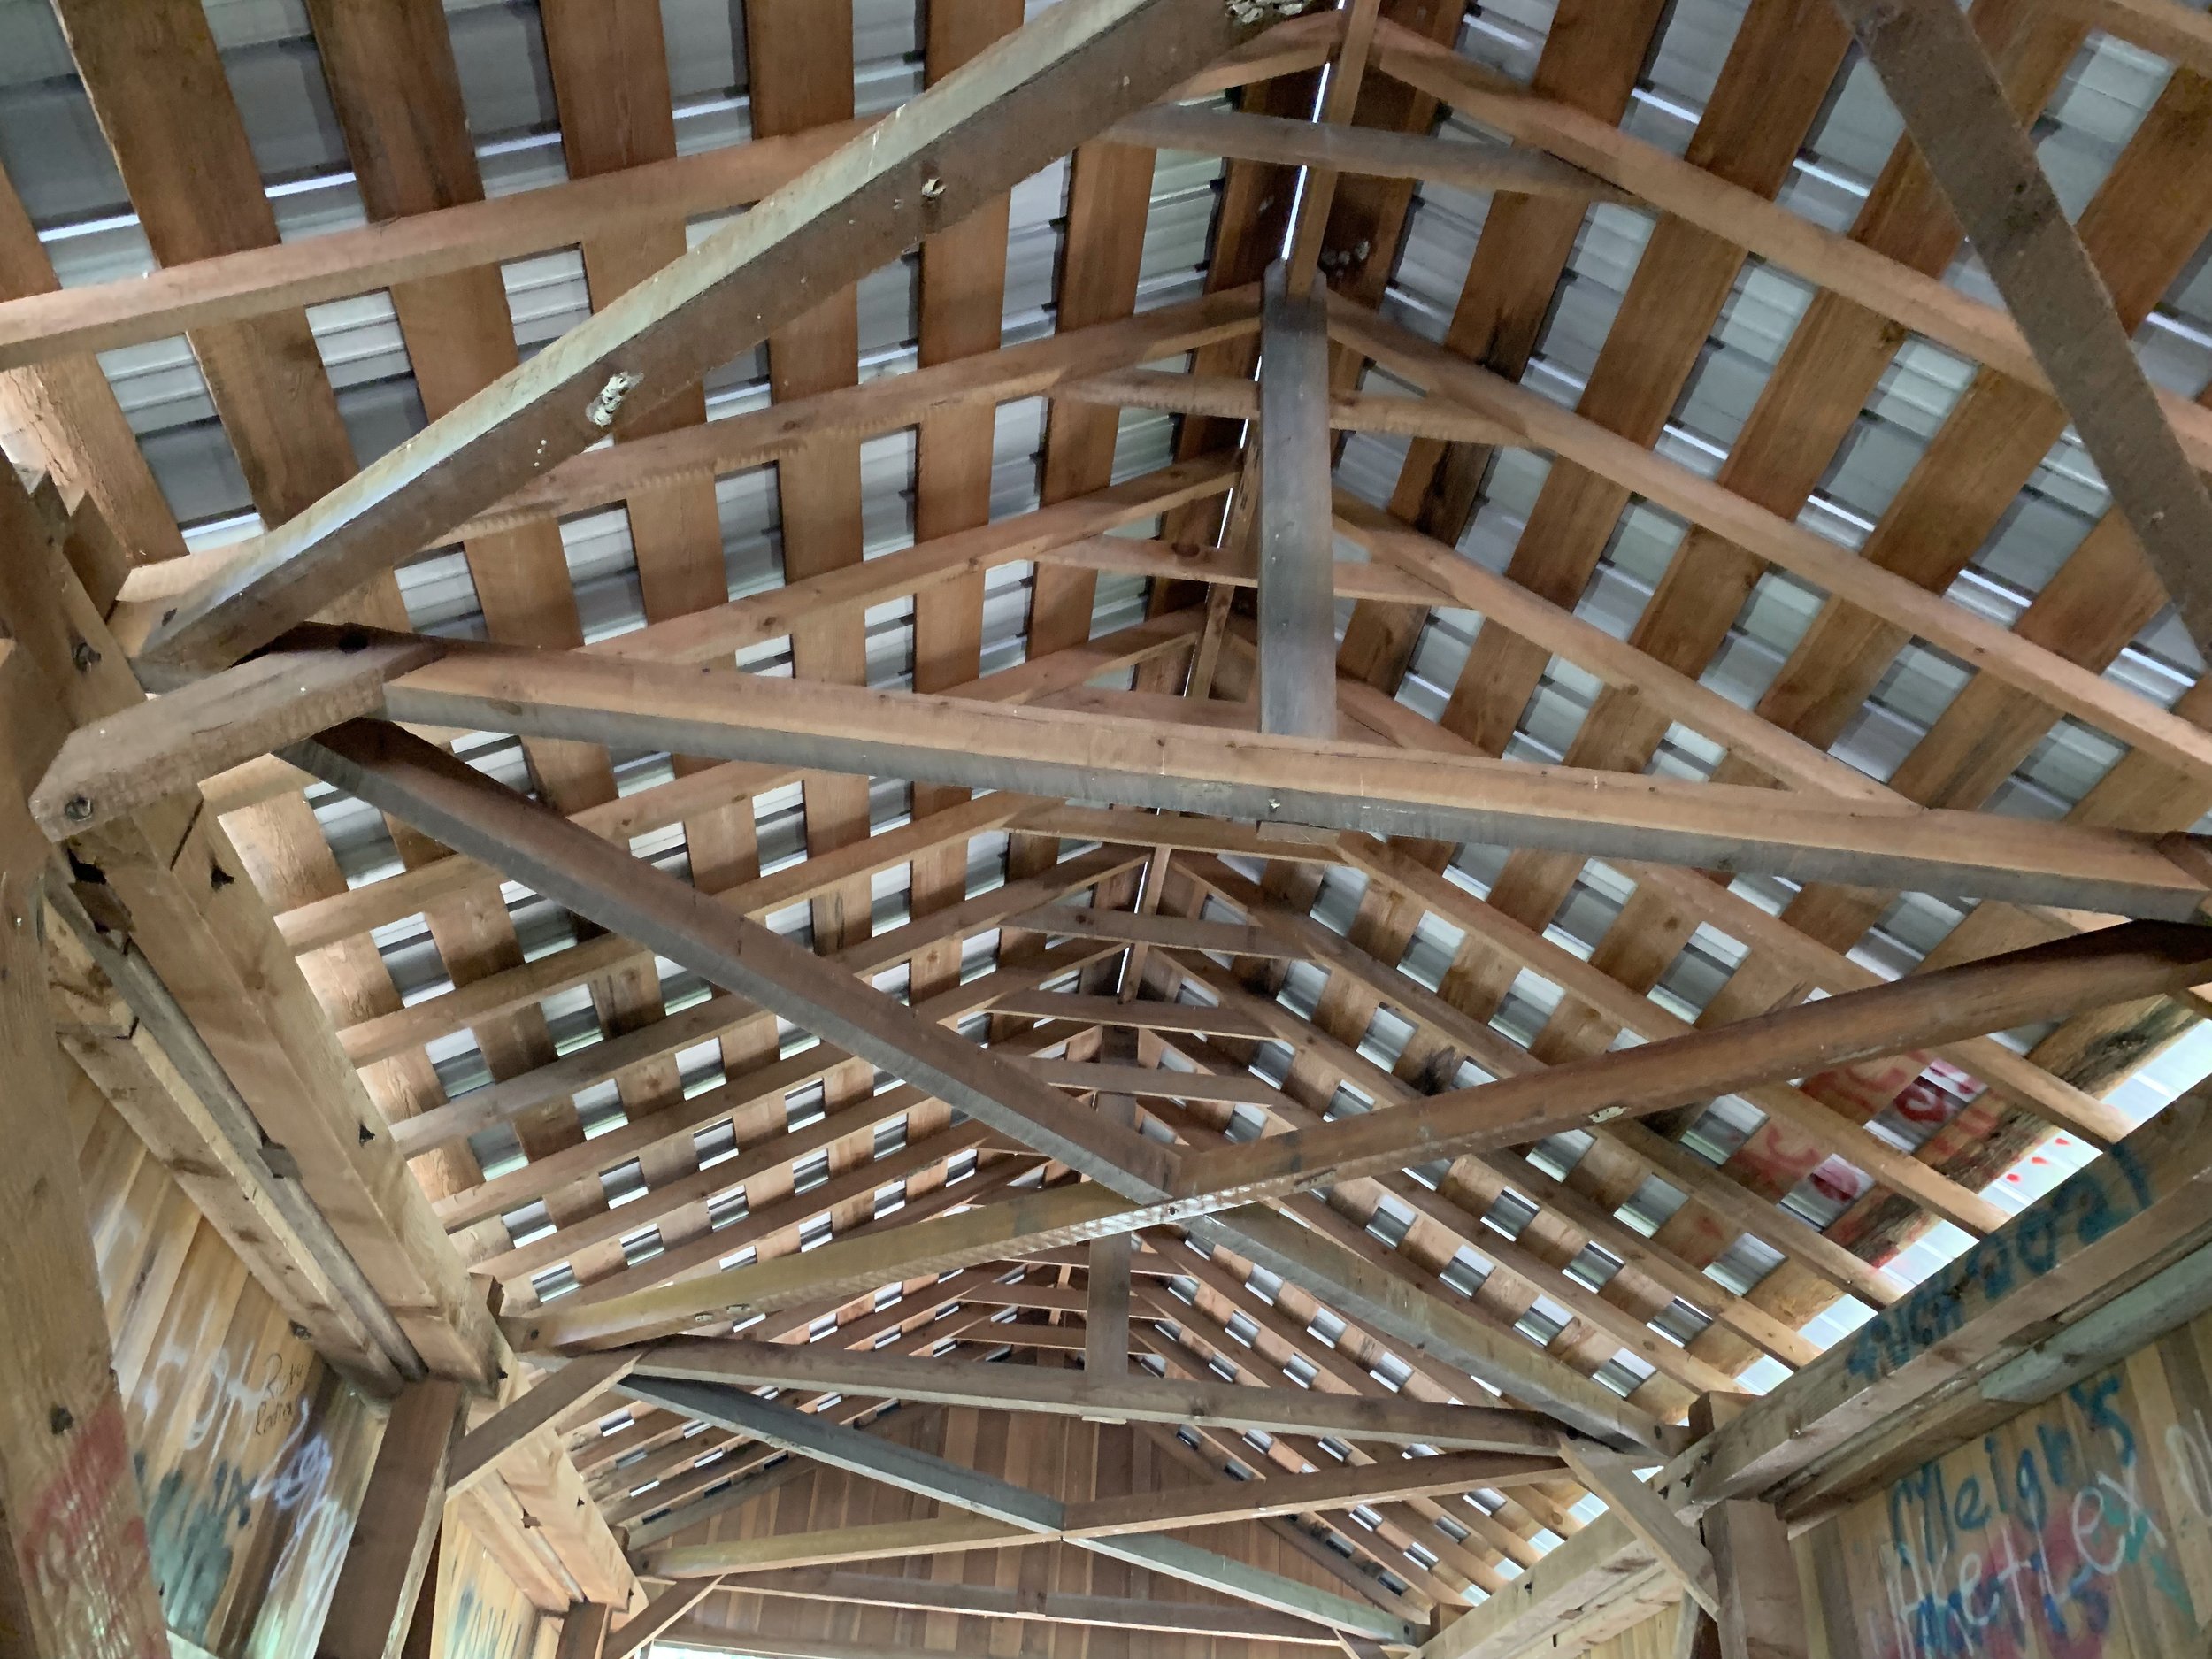 View of the bridge's roof structure